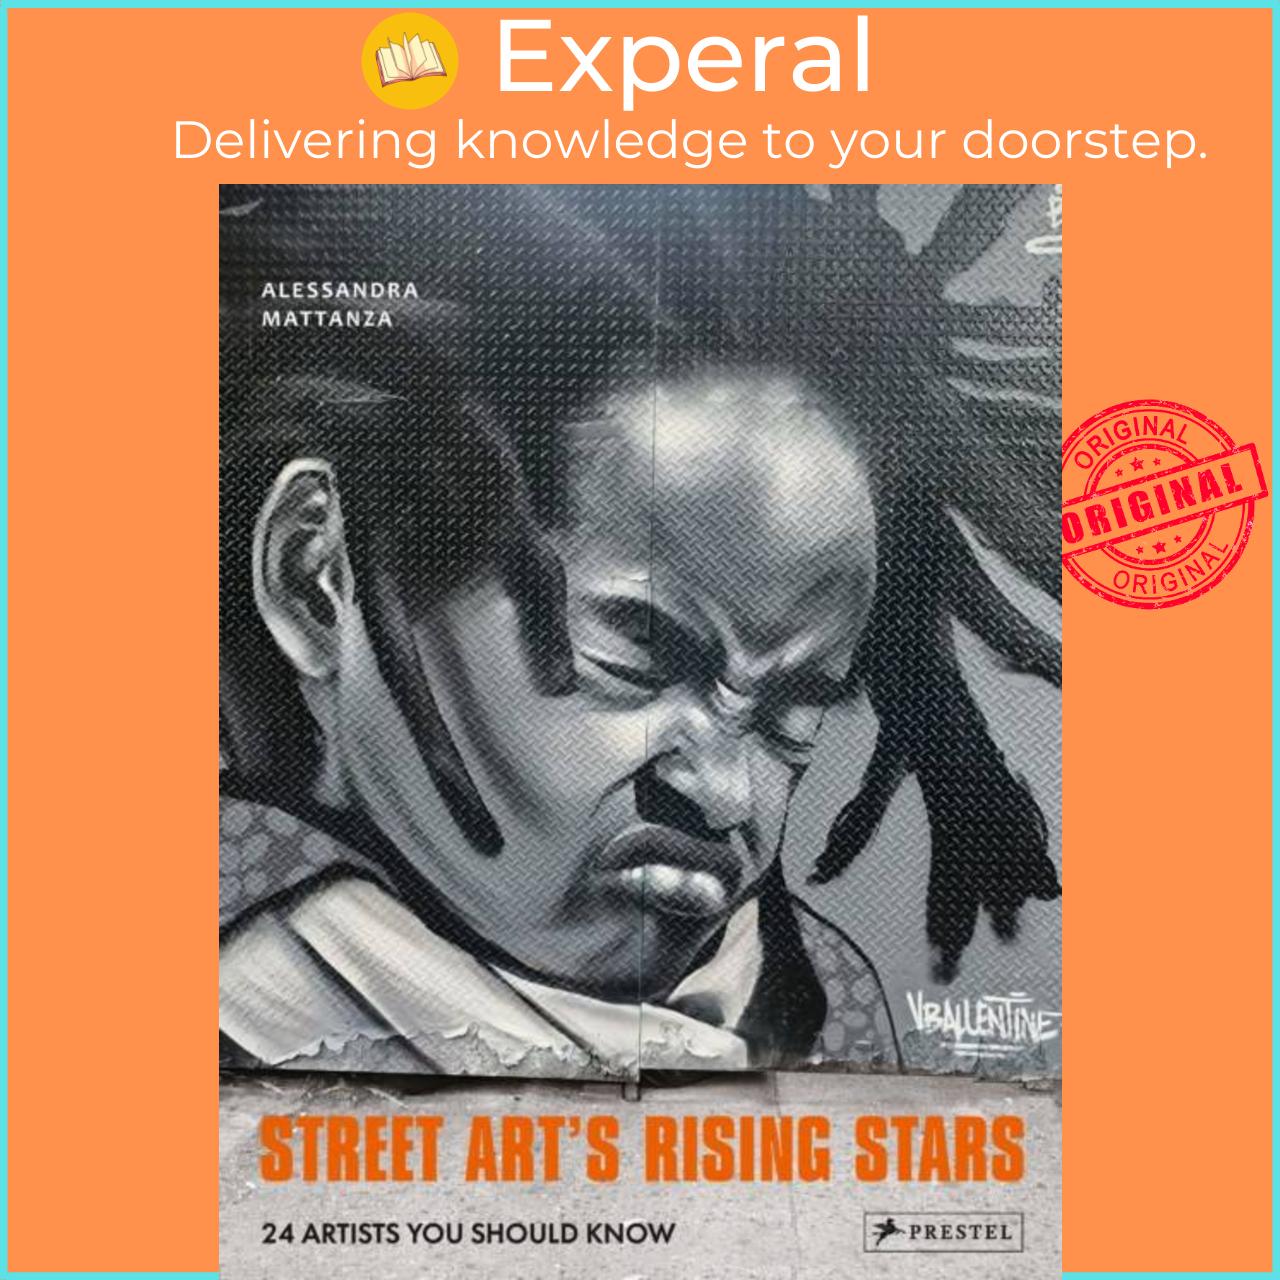 Sách - Street Art's Rising Stars - 24 Artists You Should Know by Alessandra Mattanza (UK edition, hardcover)